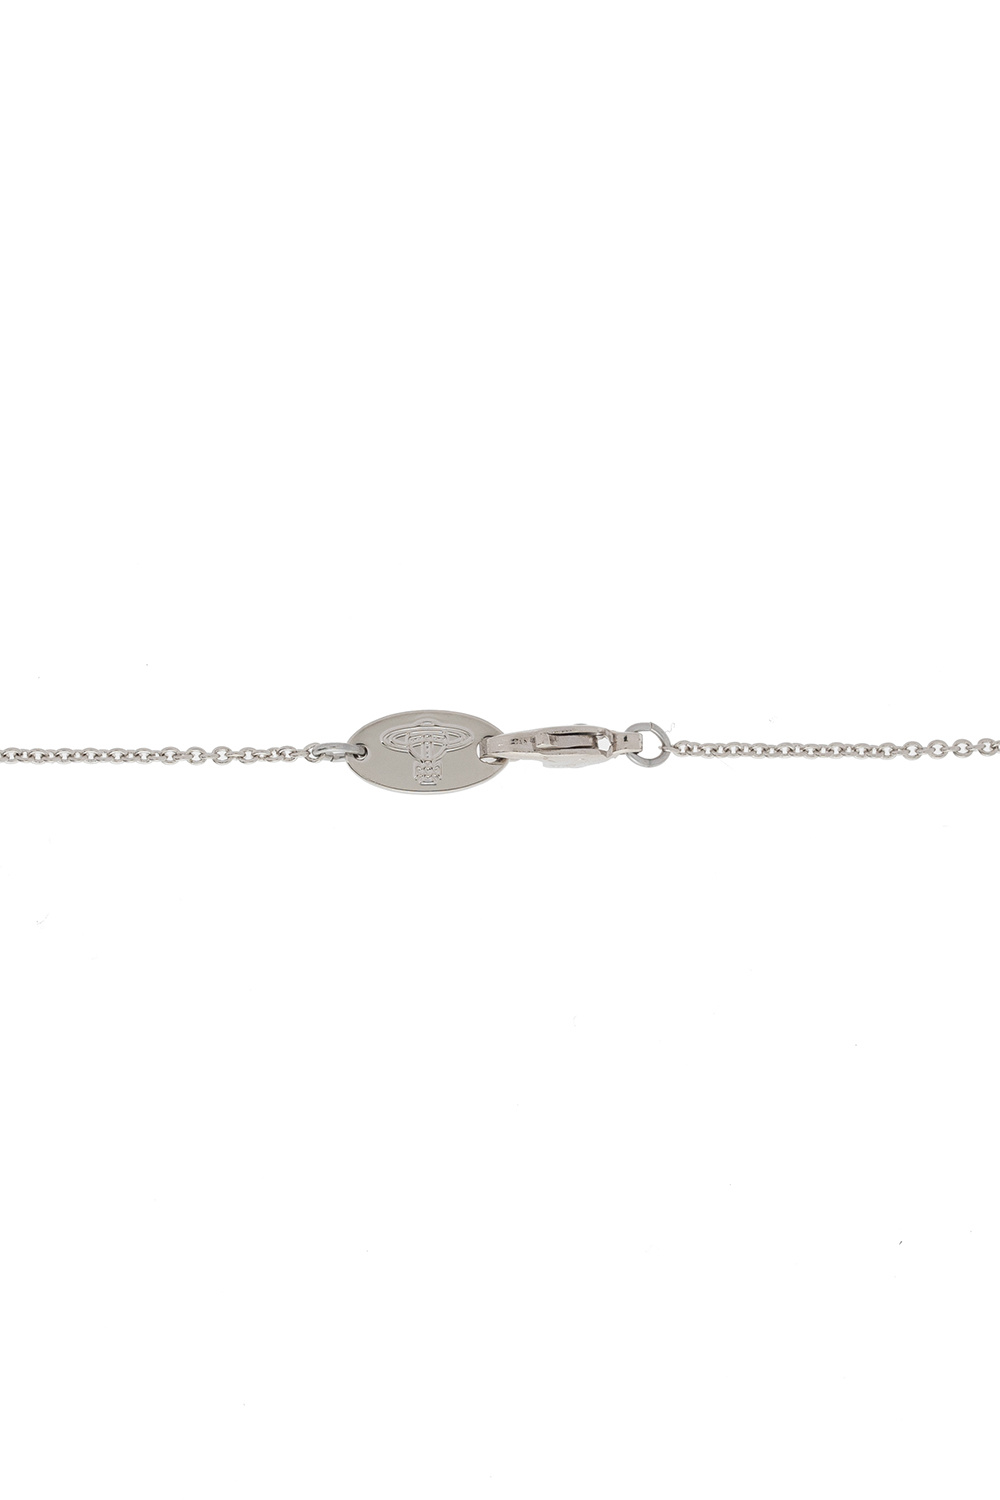 Vivienne Westwood ‘Brandita Long’ necklace with charms